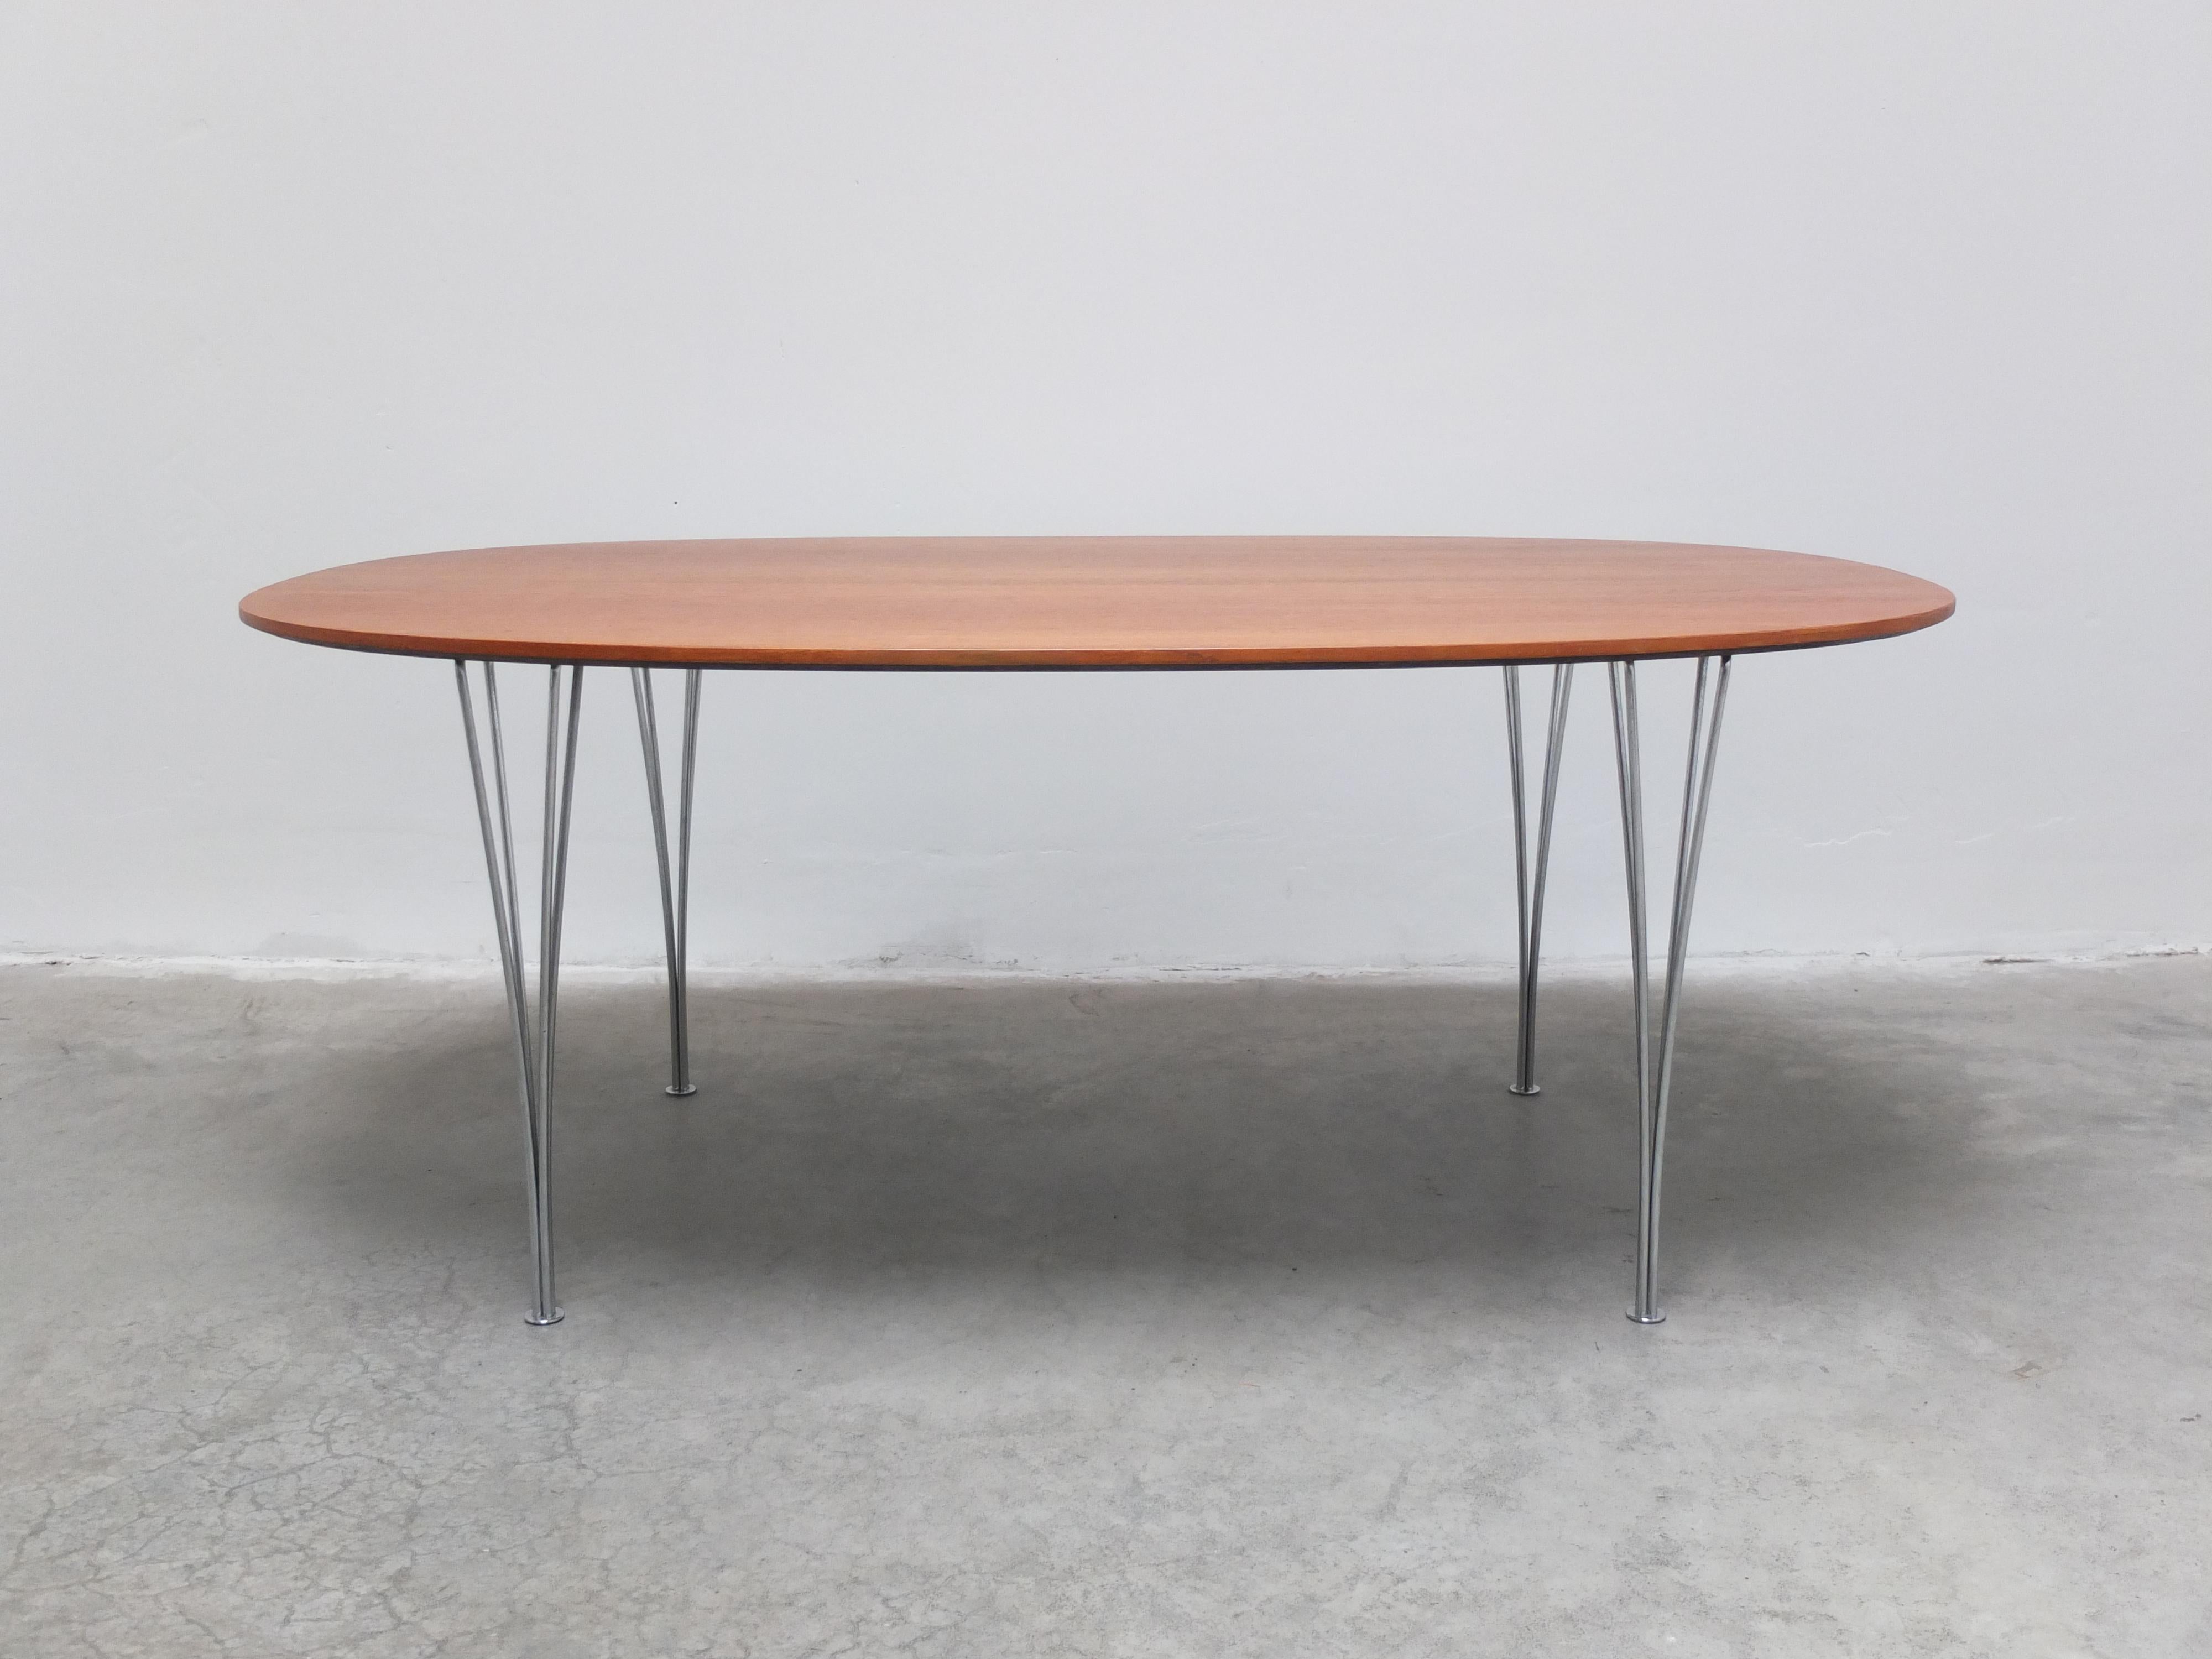 Danish Modern classic ‘Super-Elliptical’ dining table designed by Piet Hein & Bruno Mathsson in 1968. This early example features a beautiful top made of teak with a magnificent wood grain. This version is not in production anymore since quite some